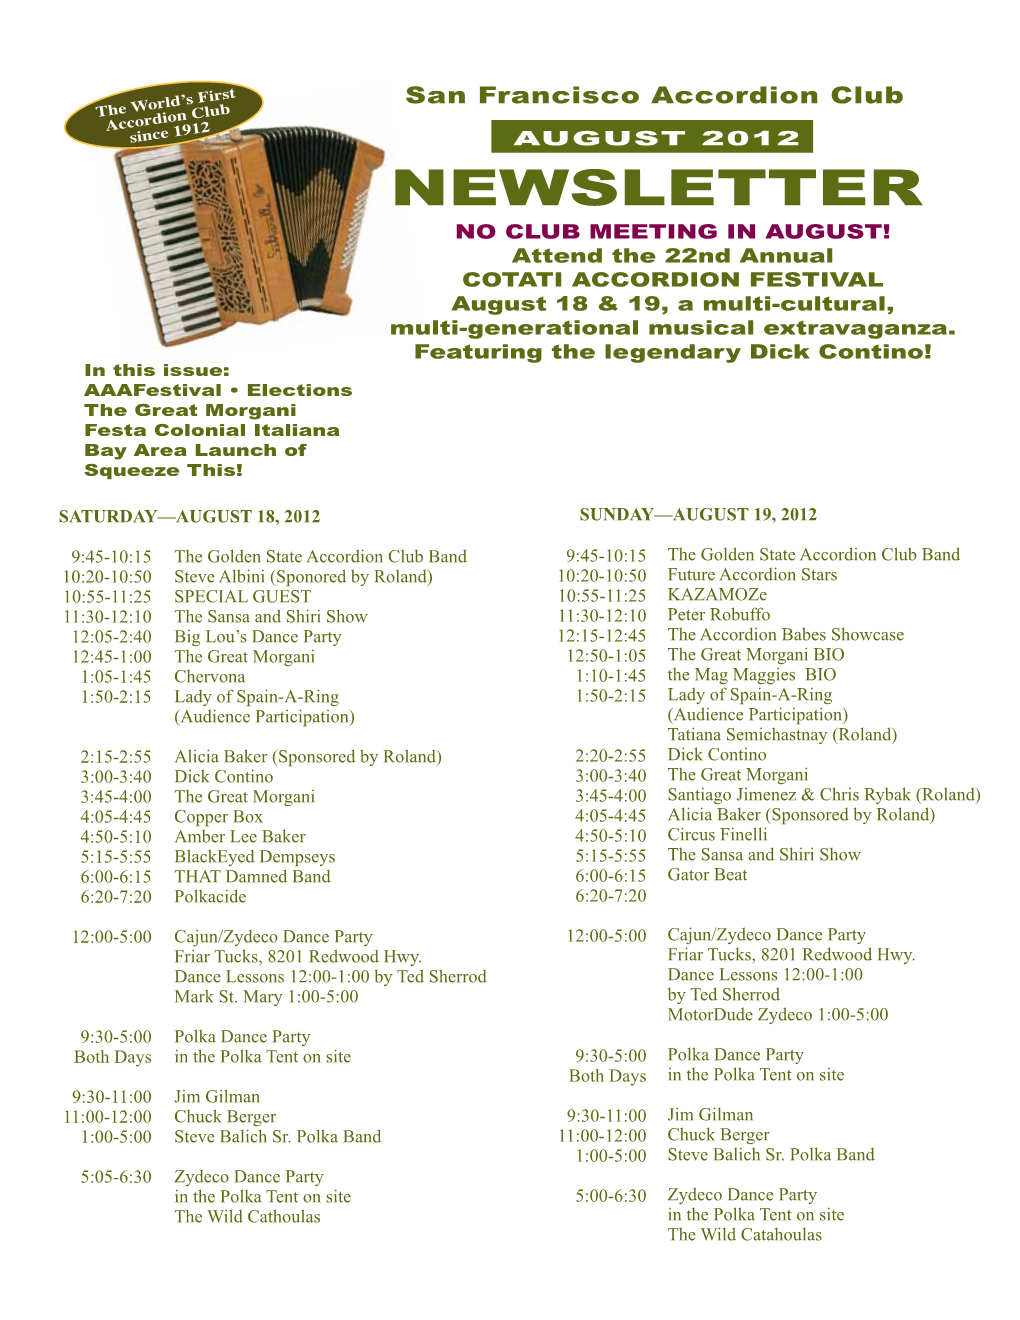 NEWSLETTER NO CLUB MEETING in AUGUST! Attend the 22Nd Annual COTATI ACCORDION FESTIVAL August 18 & 19, a Multi-Cultural, Multi-Generational Musical Extravaganza